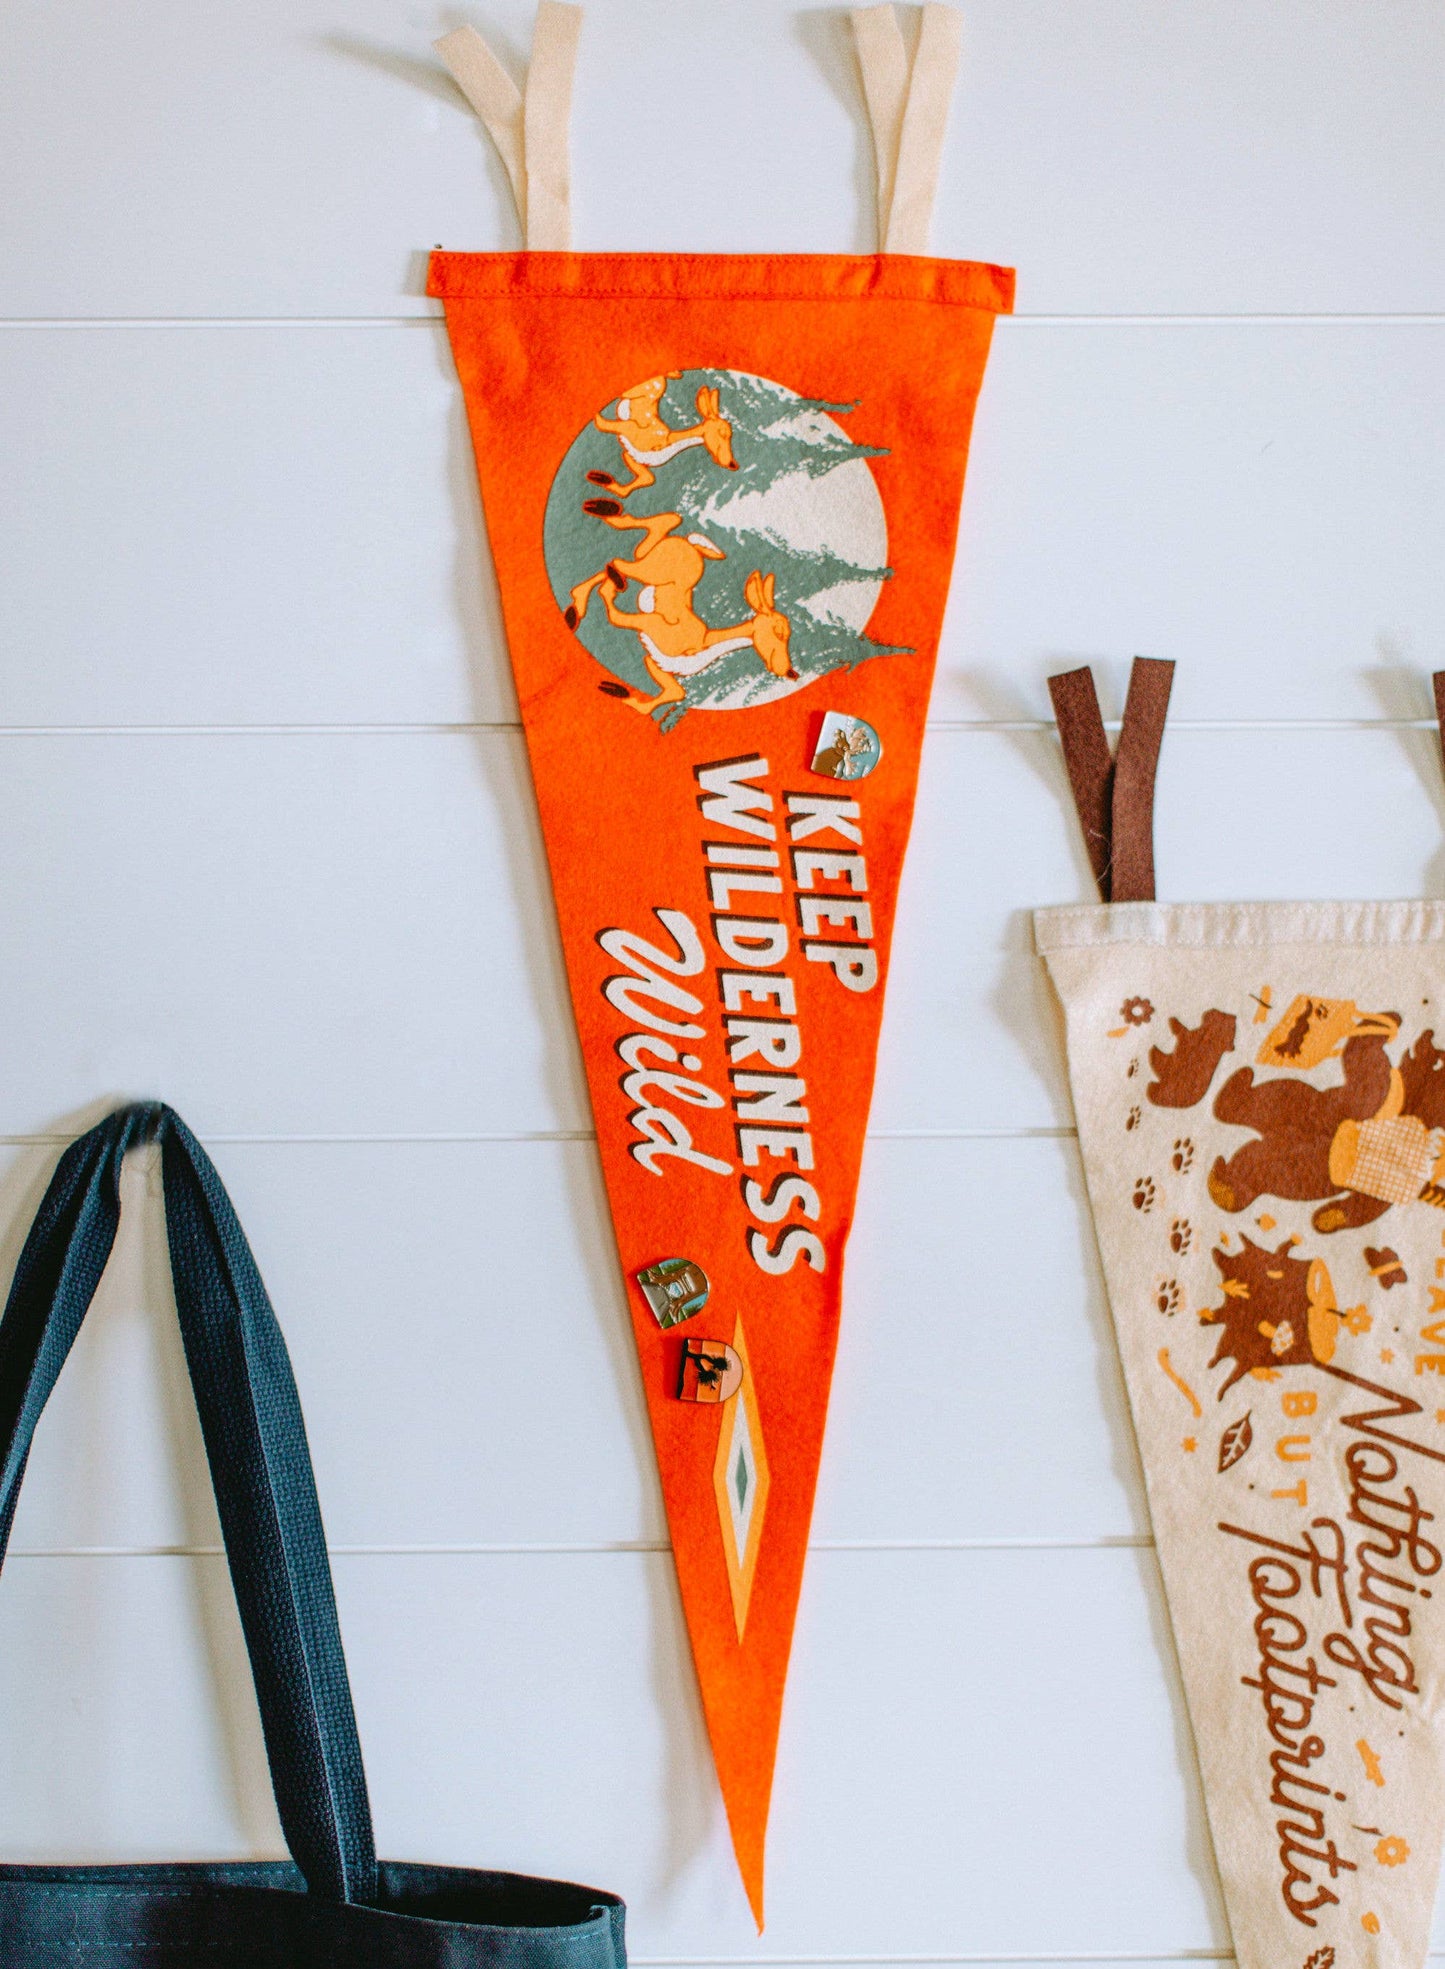 Bright orange pennant with deer in a forest, reading "Keep Wilderness Wild" by Oxford Pennant and Good + Well Supply Co